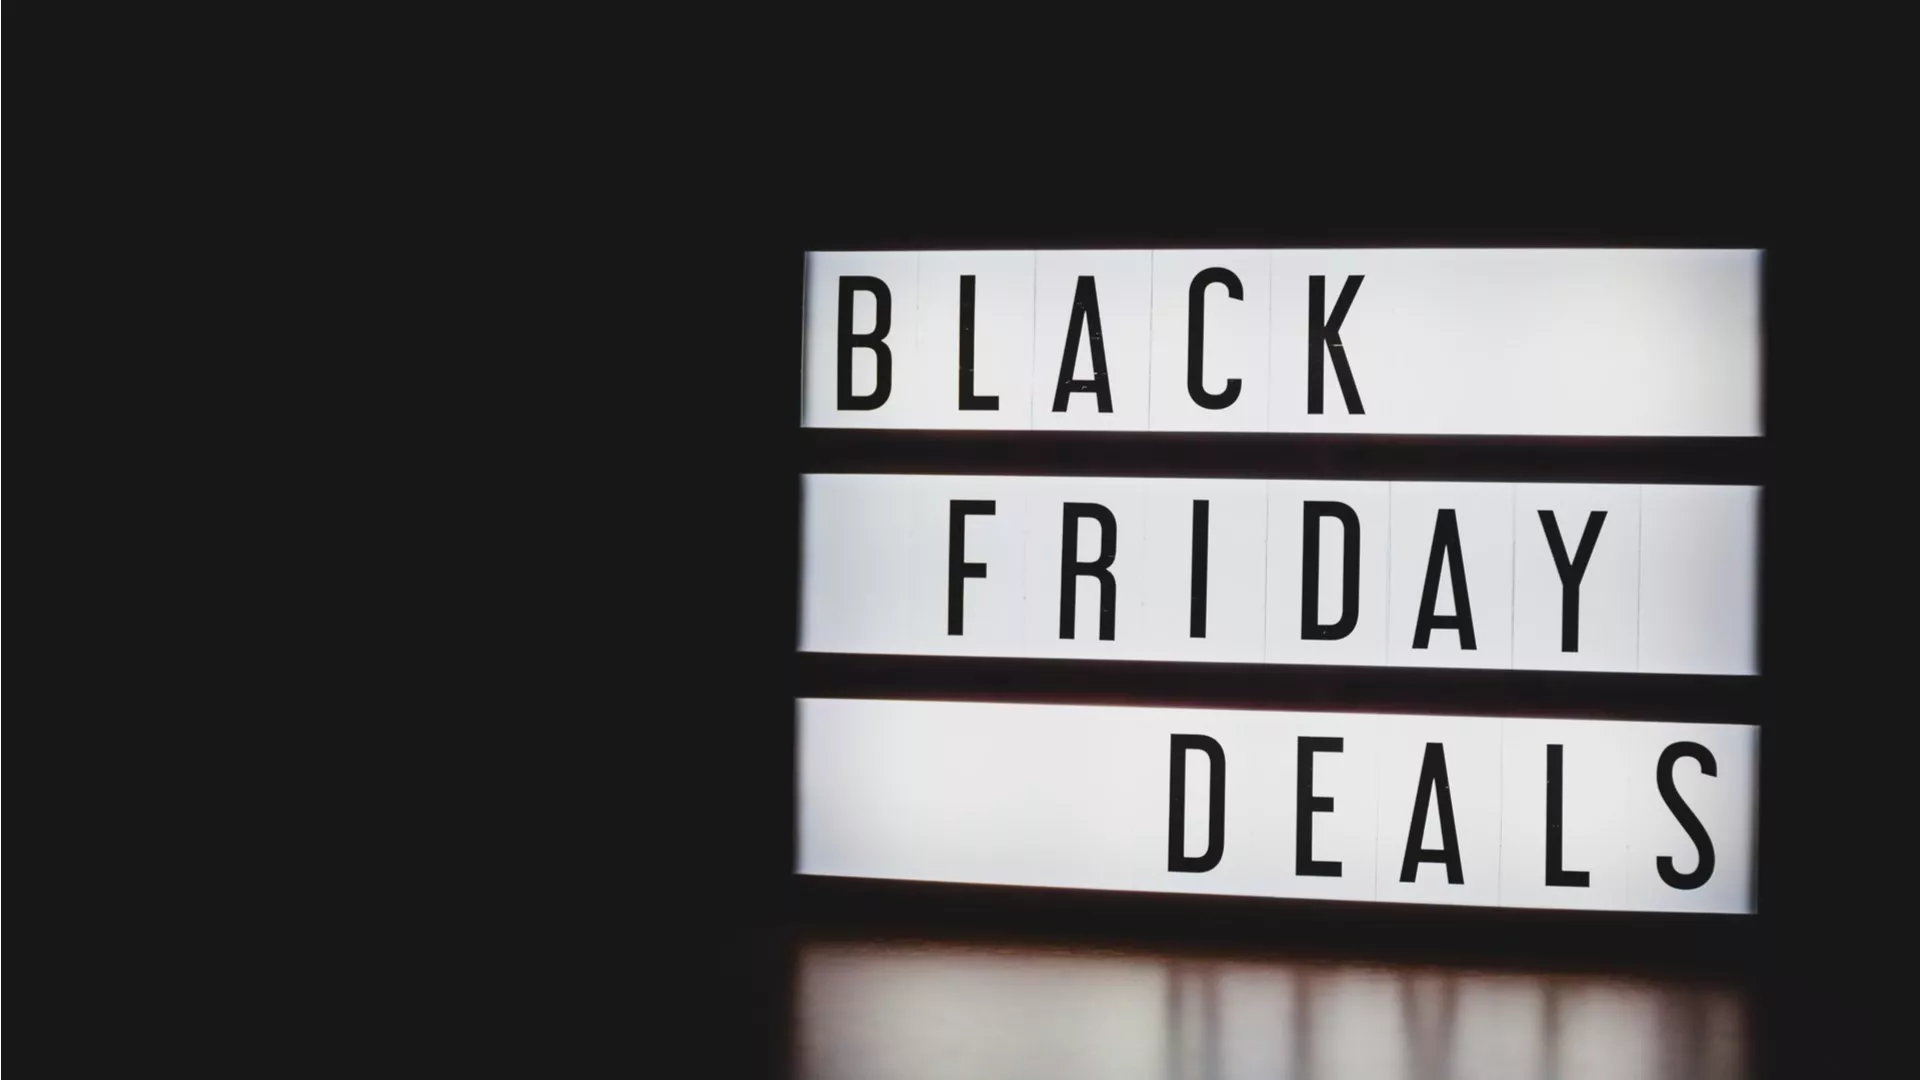 10 Best Black Friday Deals & Ads 2018 For Gadget Lovers - What Will Wwbw Black Friday Deals Be